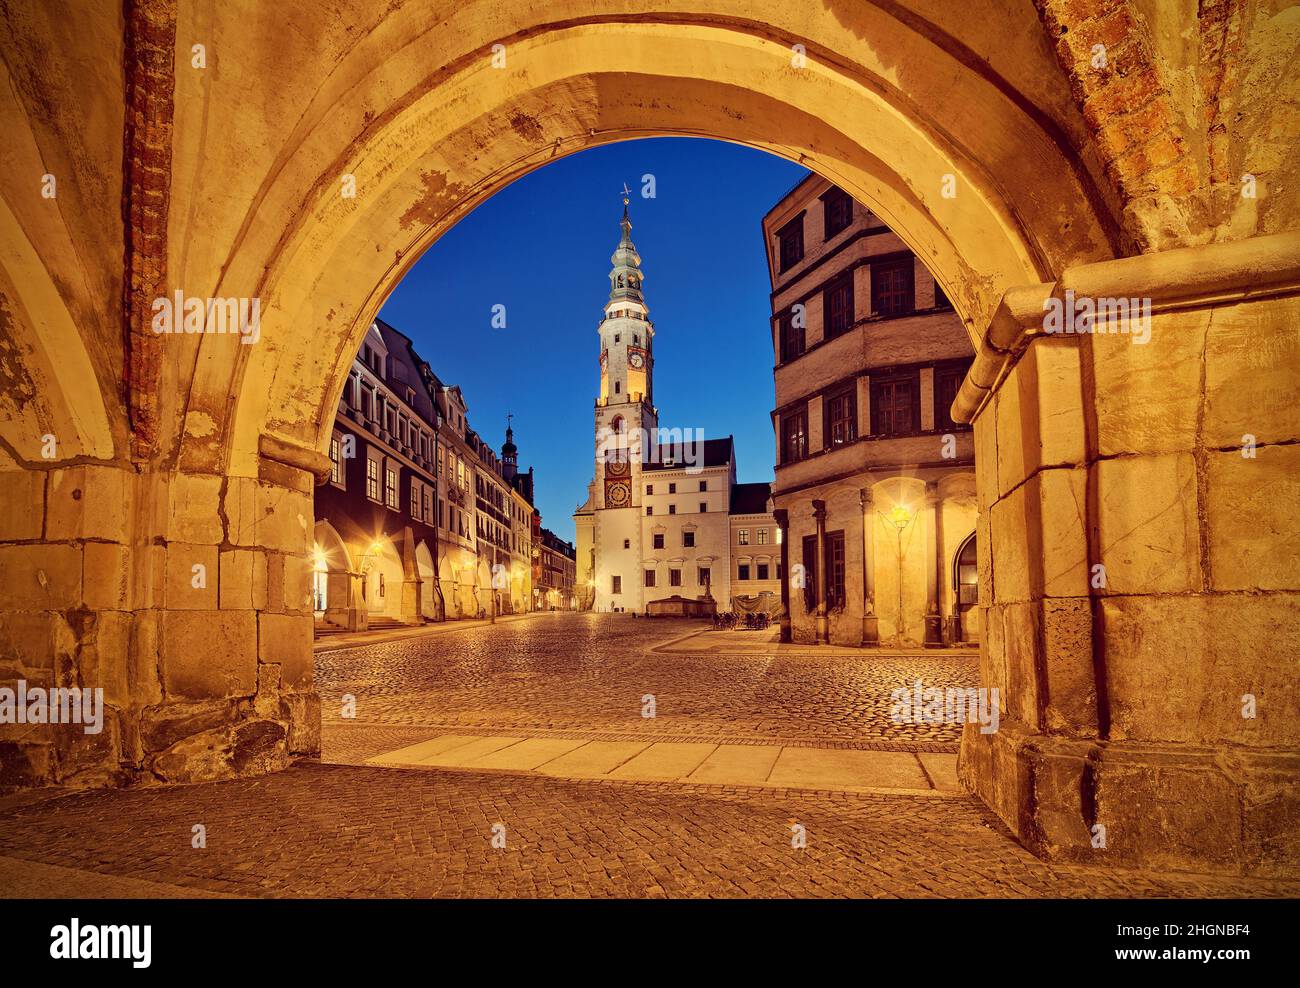 East Germany, Görlitz, Gorlitz - The Old Town Hall with clock tower on the Lower Market Square Stock Photo